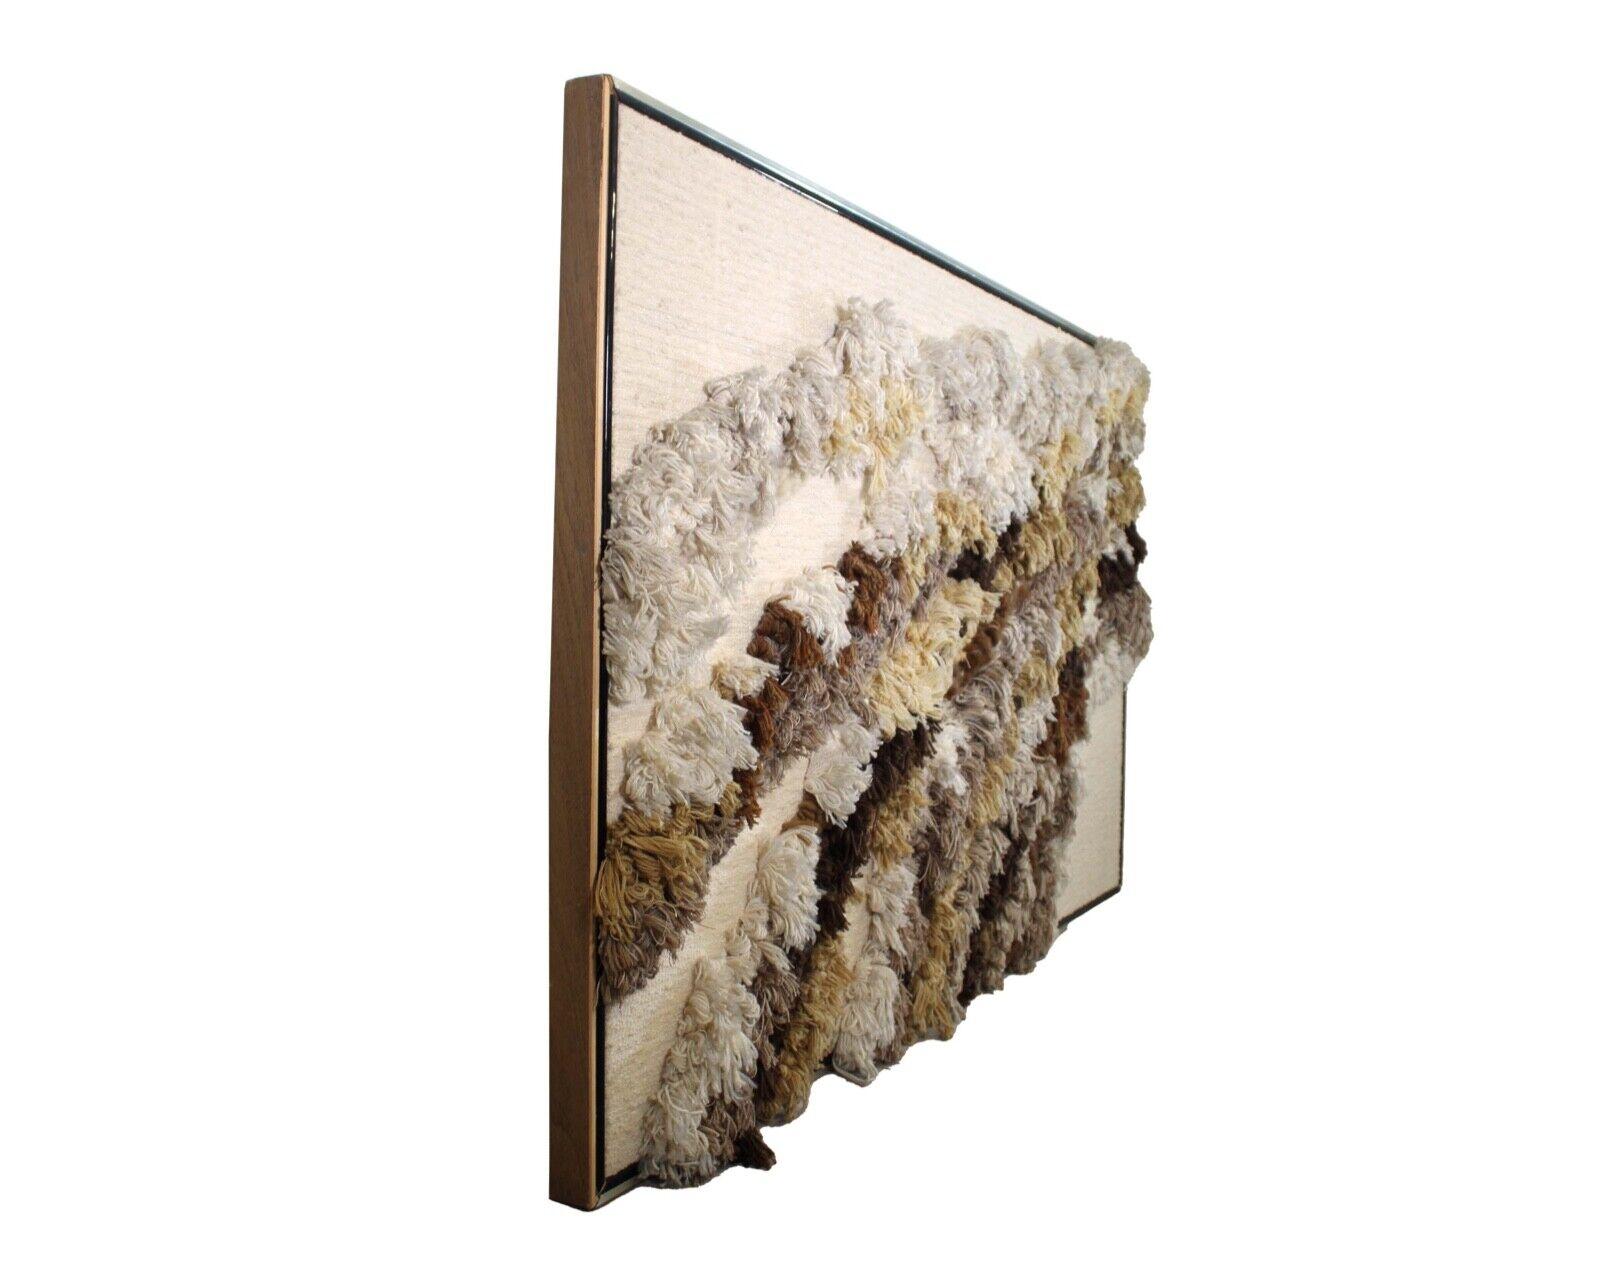 A magnificent, framed, handwoven, abstract fiber wall art made with wool yarn, by Robert Kidd, circa 1970s. This textural art piece makes a unique statement artwork for a modern or contemporary designed space. Dimensions: 73